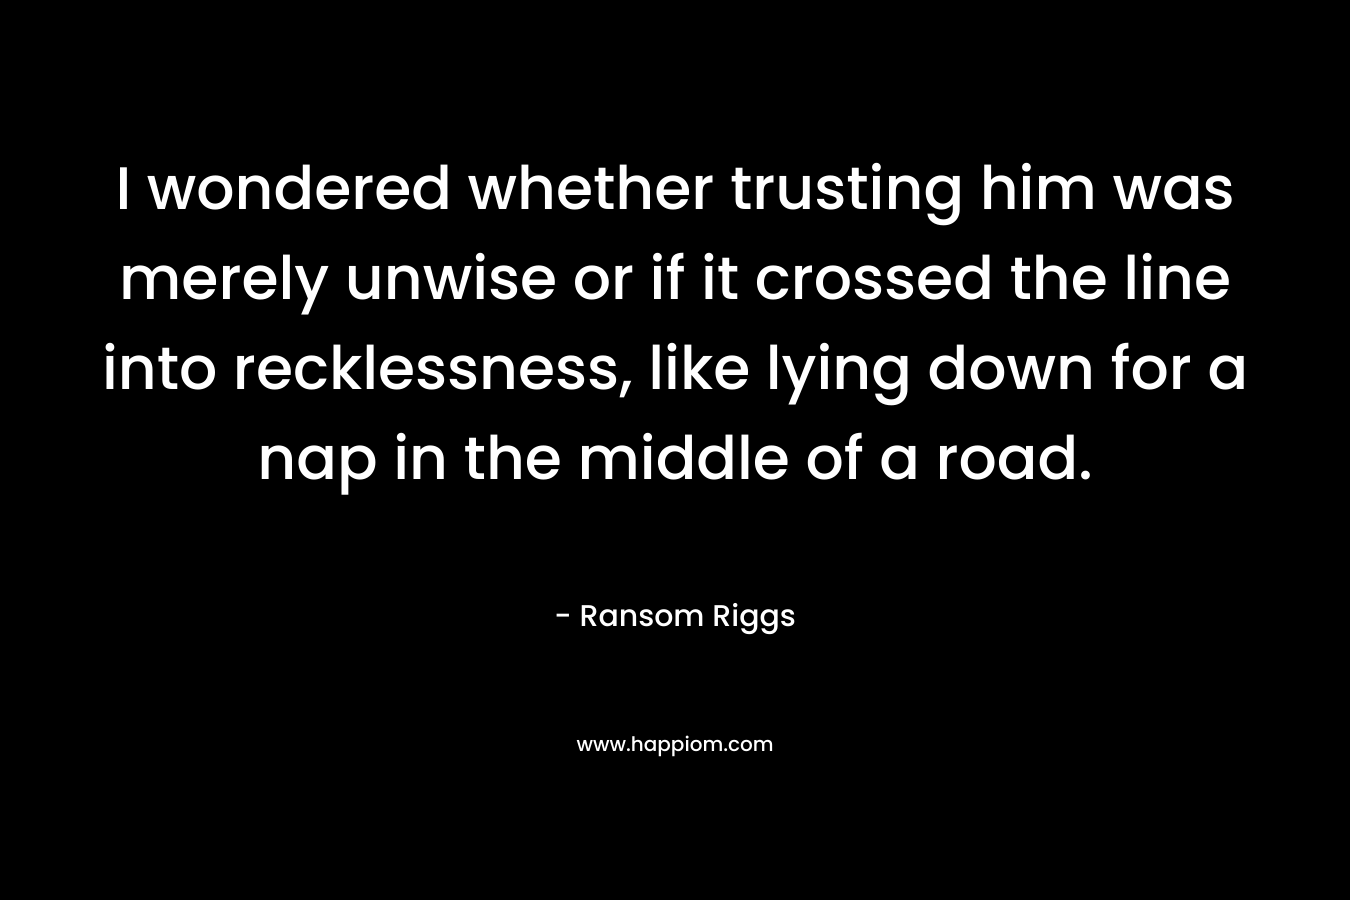 I wondered whether trusting him was merely unwise or if it crossed the line into recklessness, like lying down for a nap in the middle of a road.